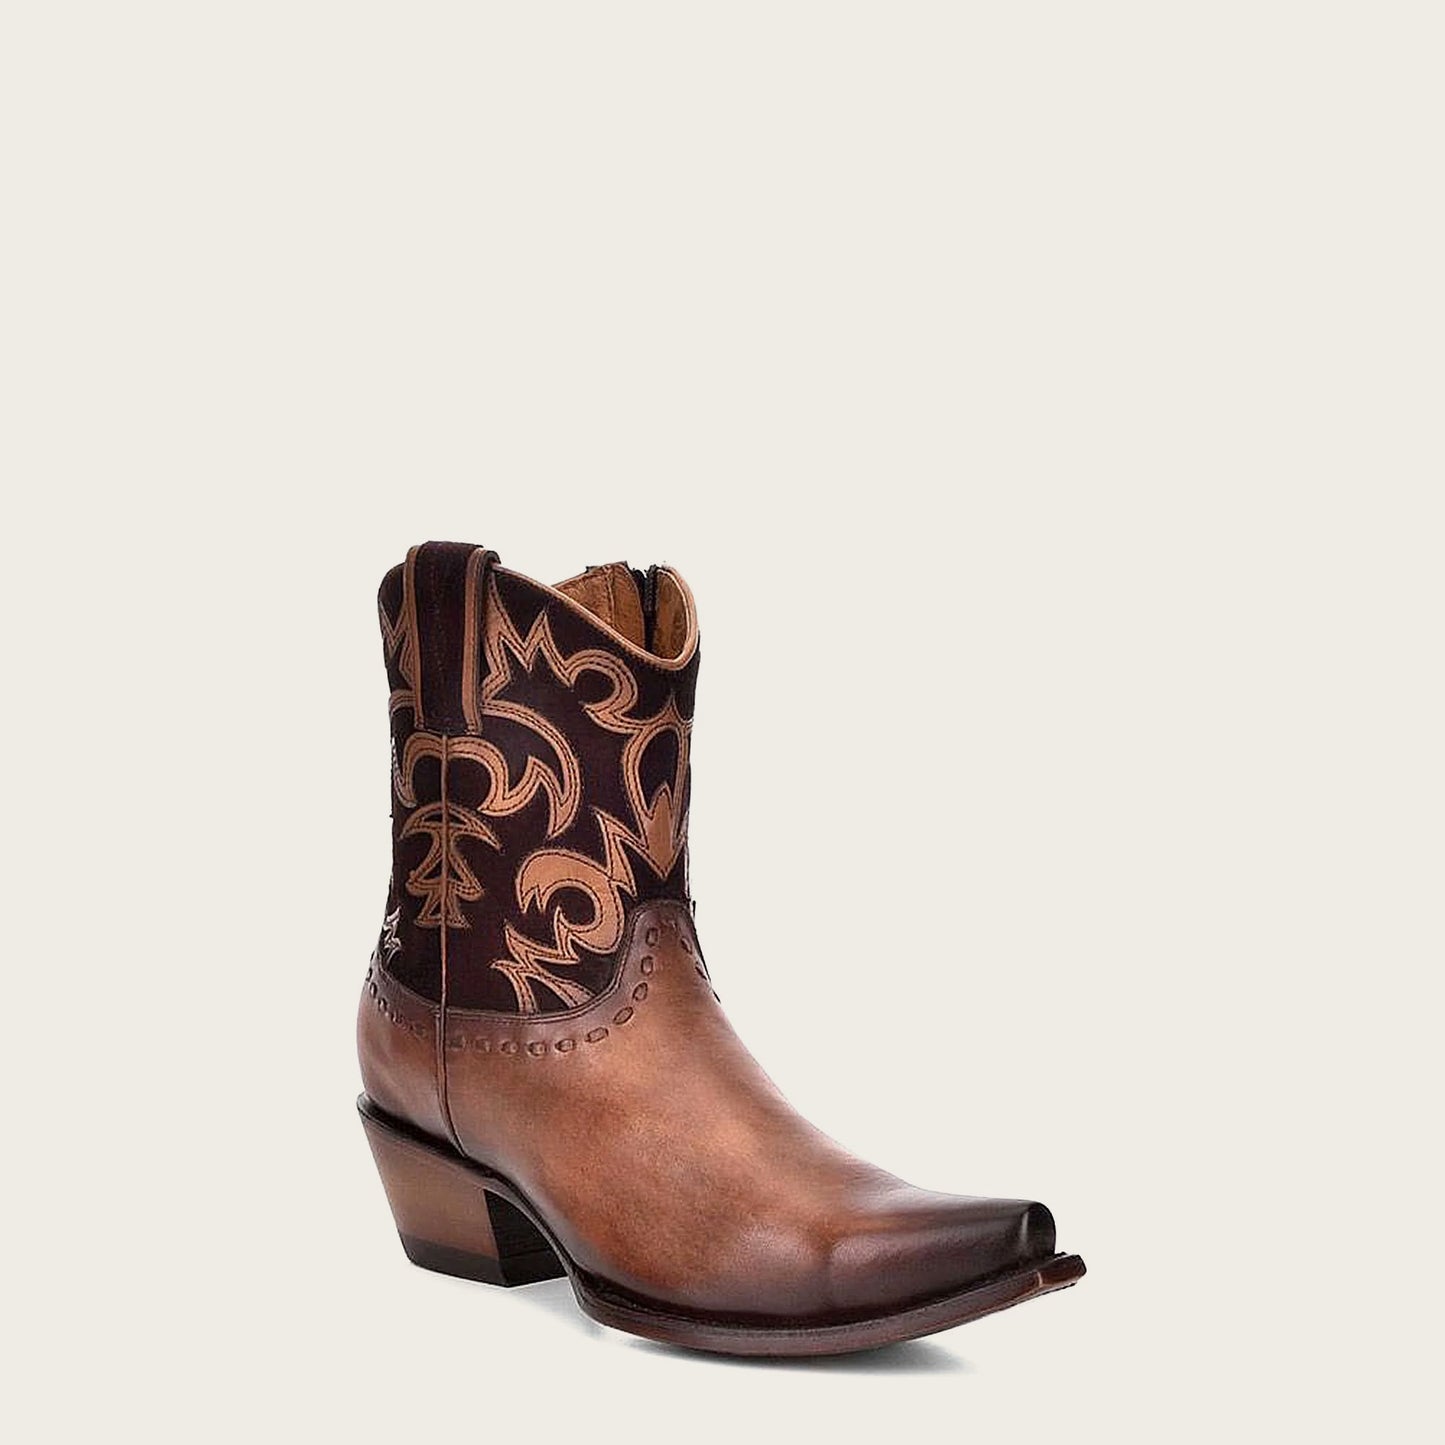 Brown Western leather bootie - high-quality leather with classic pointed toe and slanted heel, versatile for any occasion.